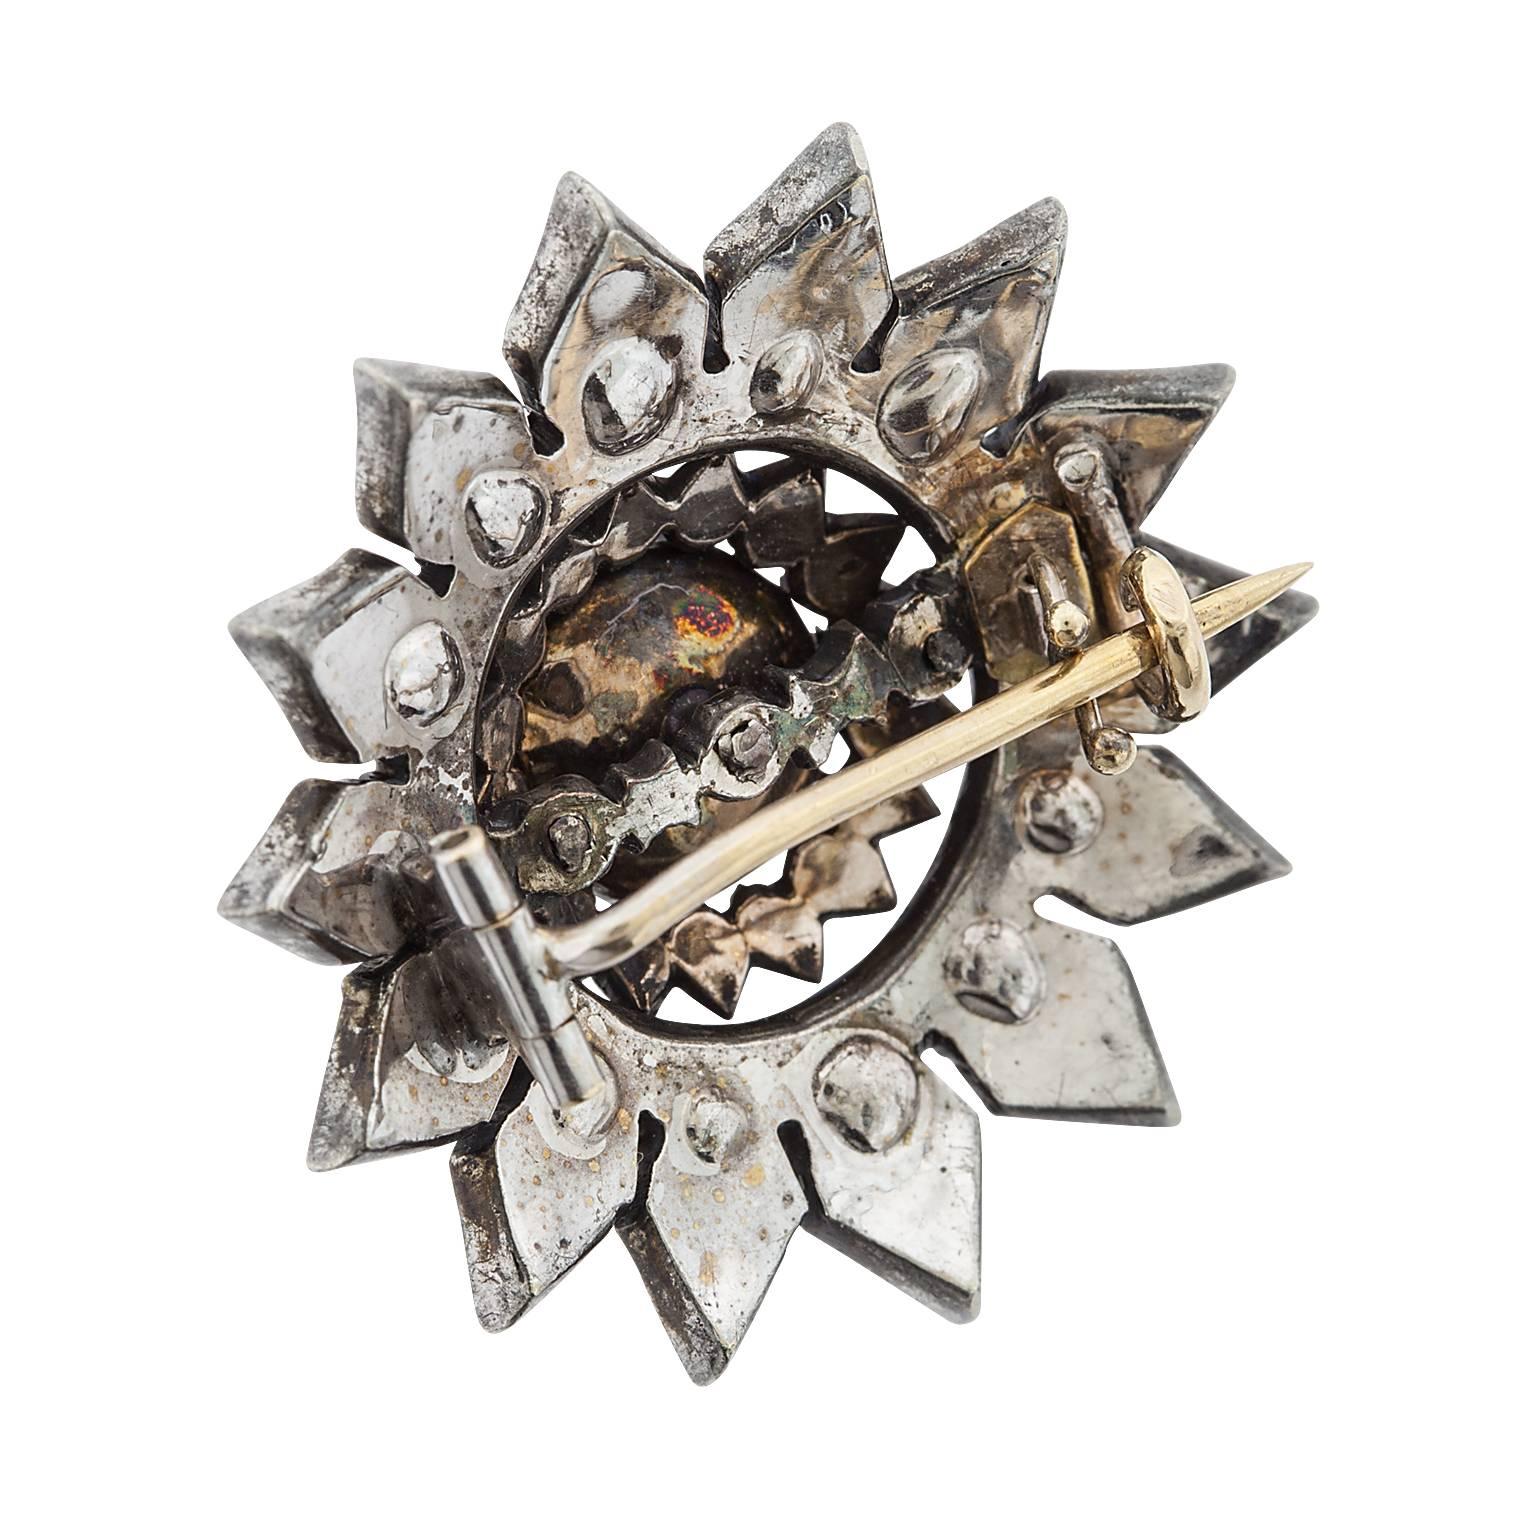 A Victorian era silver over gold cabochon moonstone and rose cut diamond brooch.  The moonstone is partially bezel set, sitting atop a single row of surrounding diamond, framed by a floral pattern of two rows of diamonds.  The moonstone measures